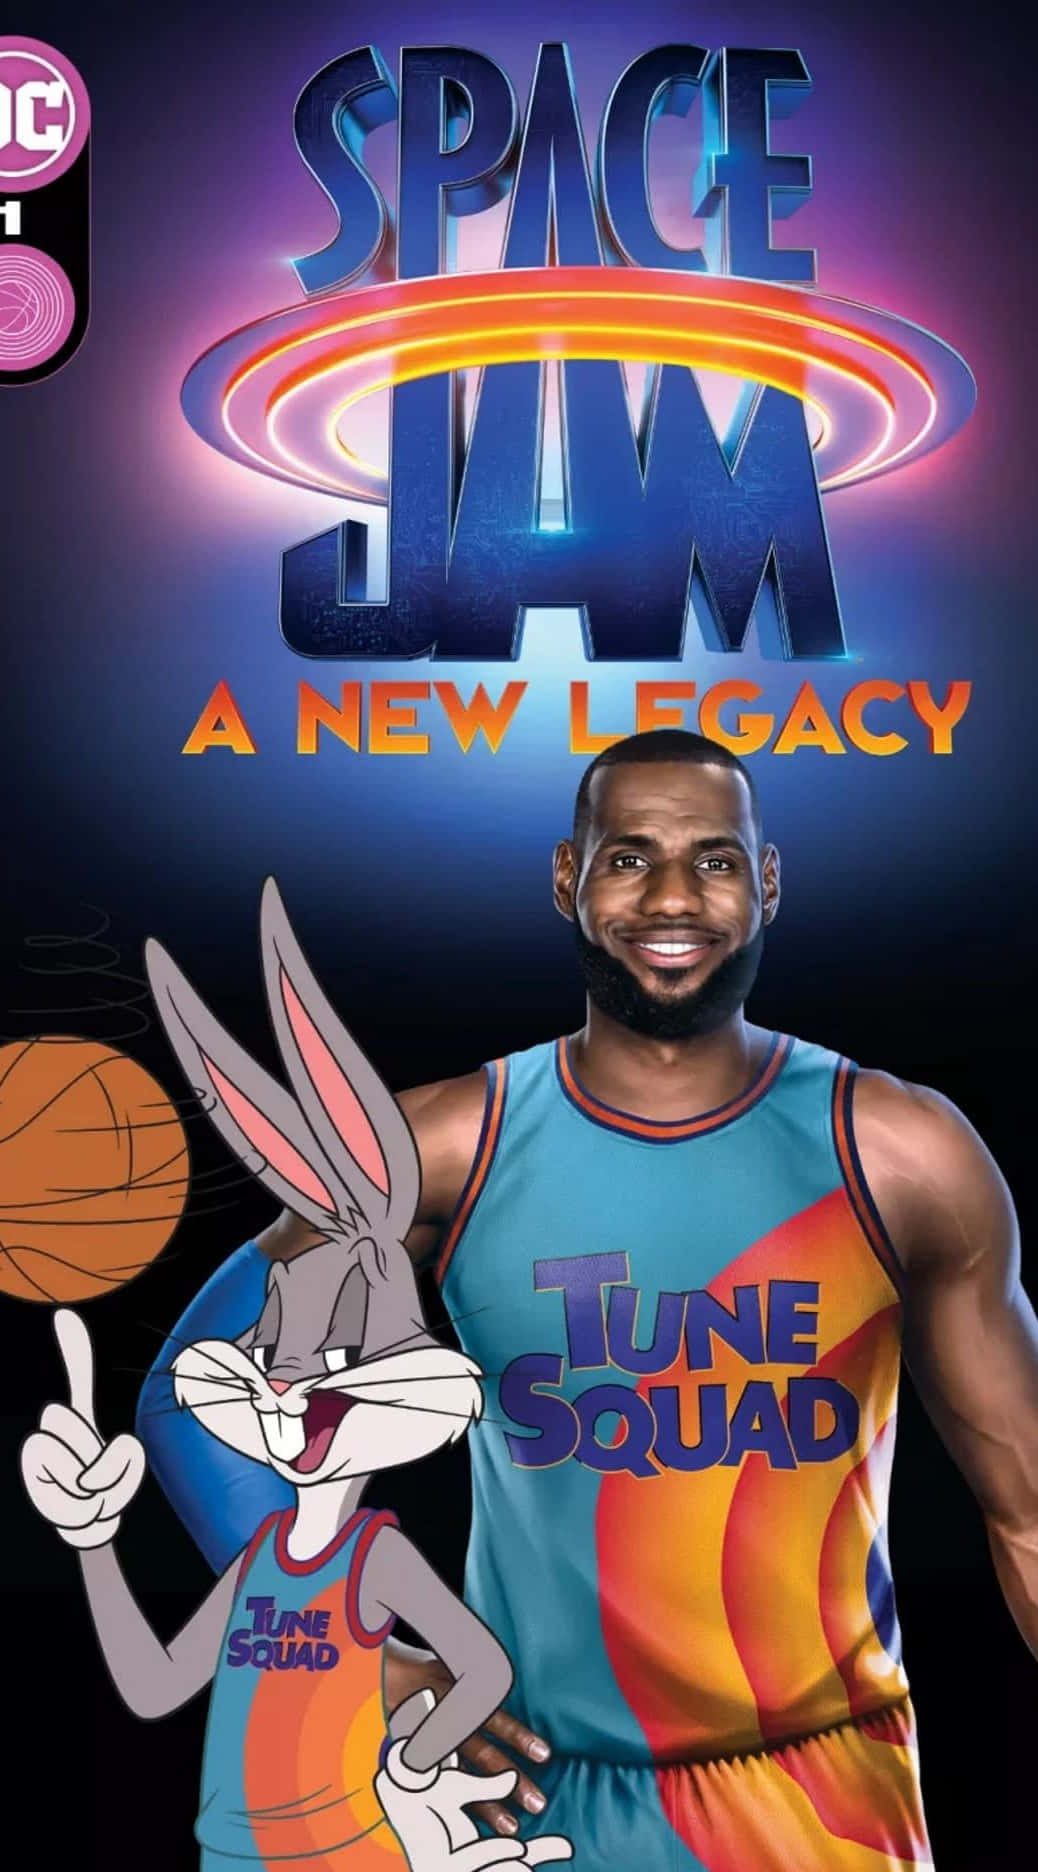 Tune Squad takes down the Monstars in the iconic film, Space Jam